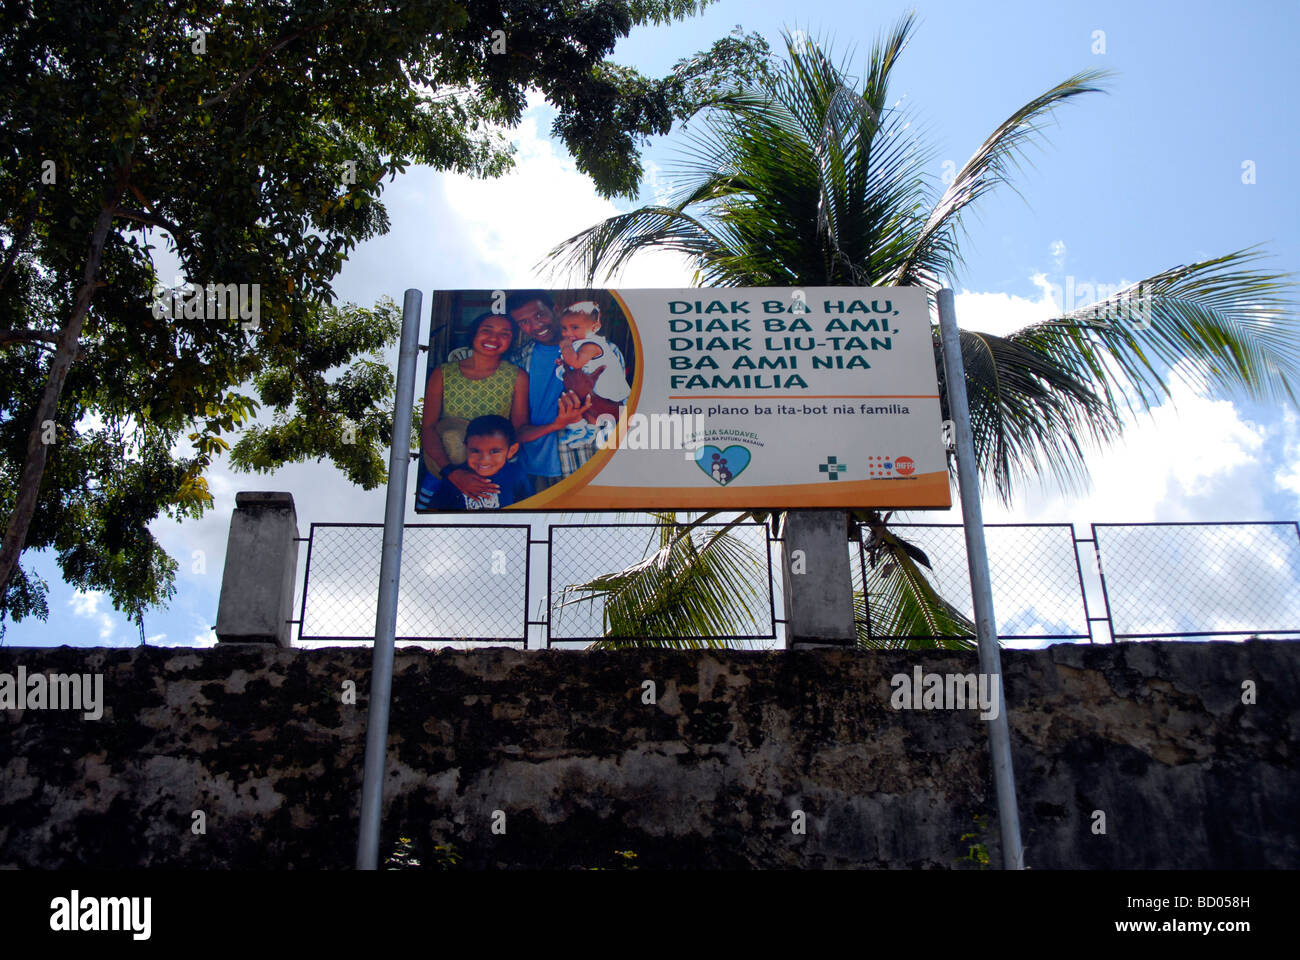 A poster promoting smaller families in Viqueque Timor Leste. The country has one of the highest birthrates in the world. Stock Photo